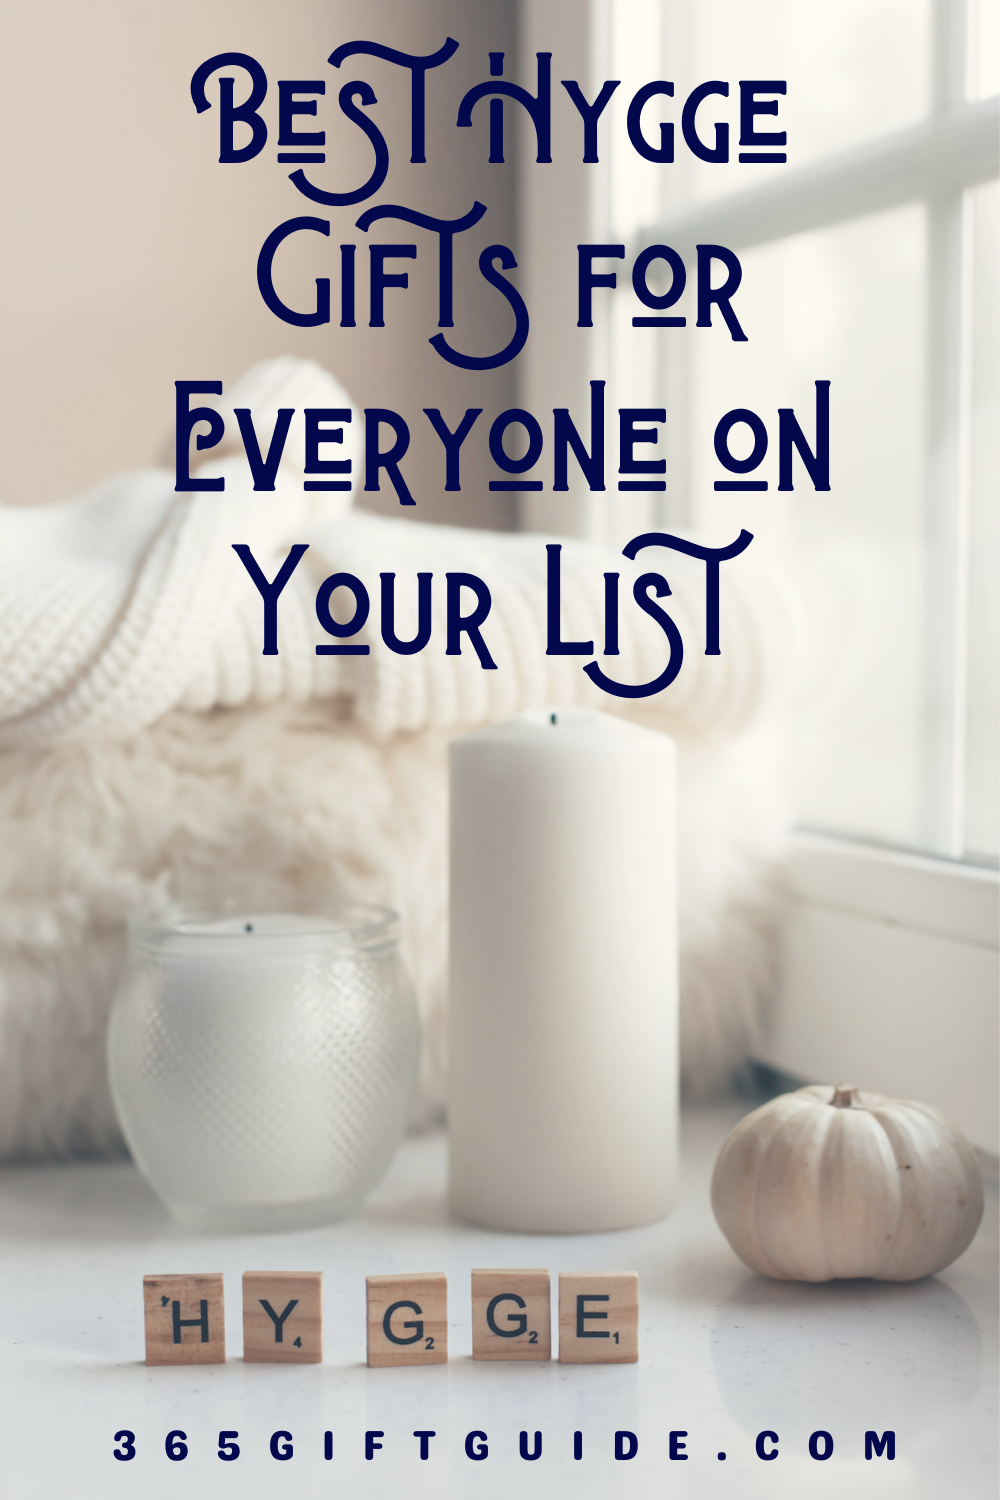 Best Hygge Gifts for Everyone on Your List